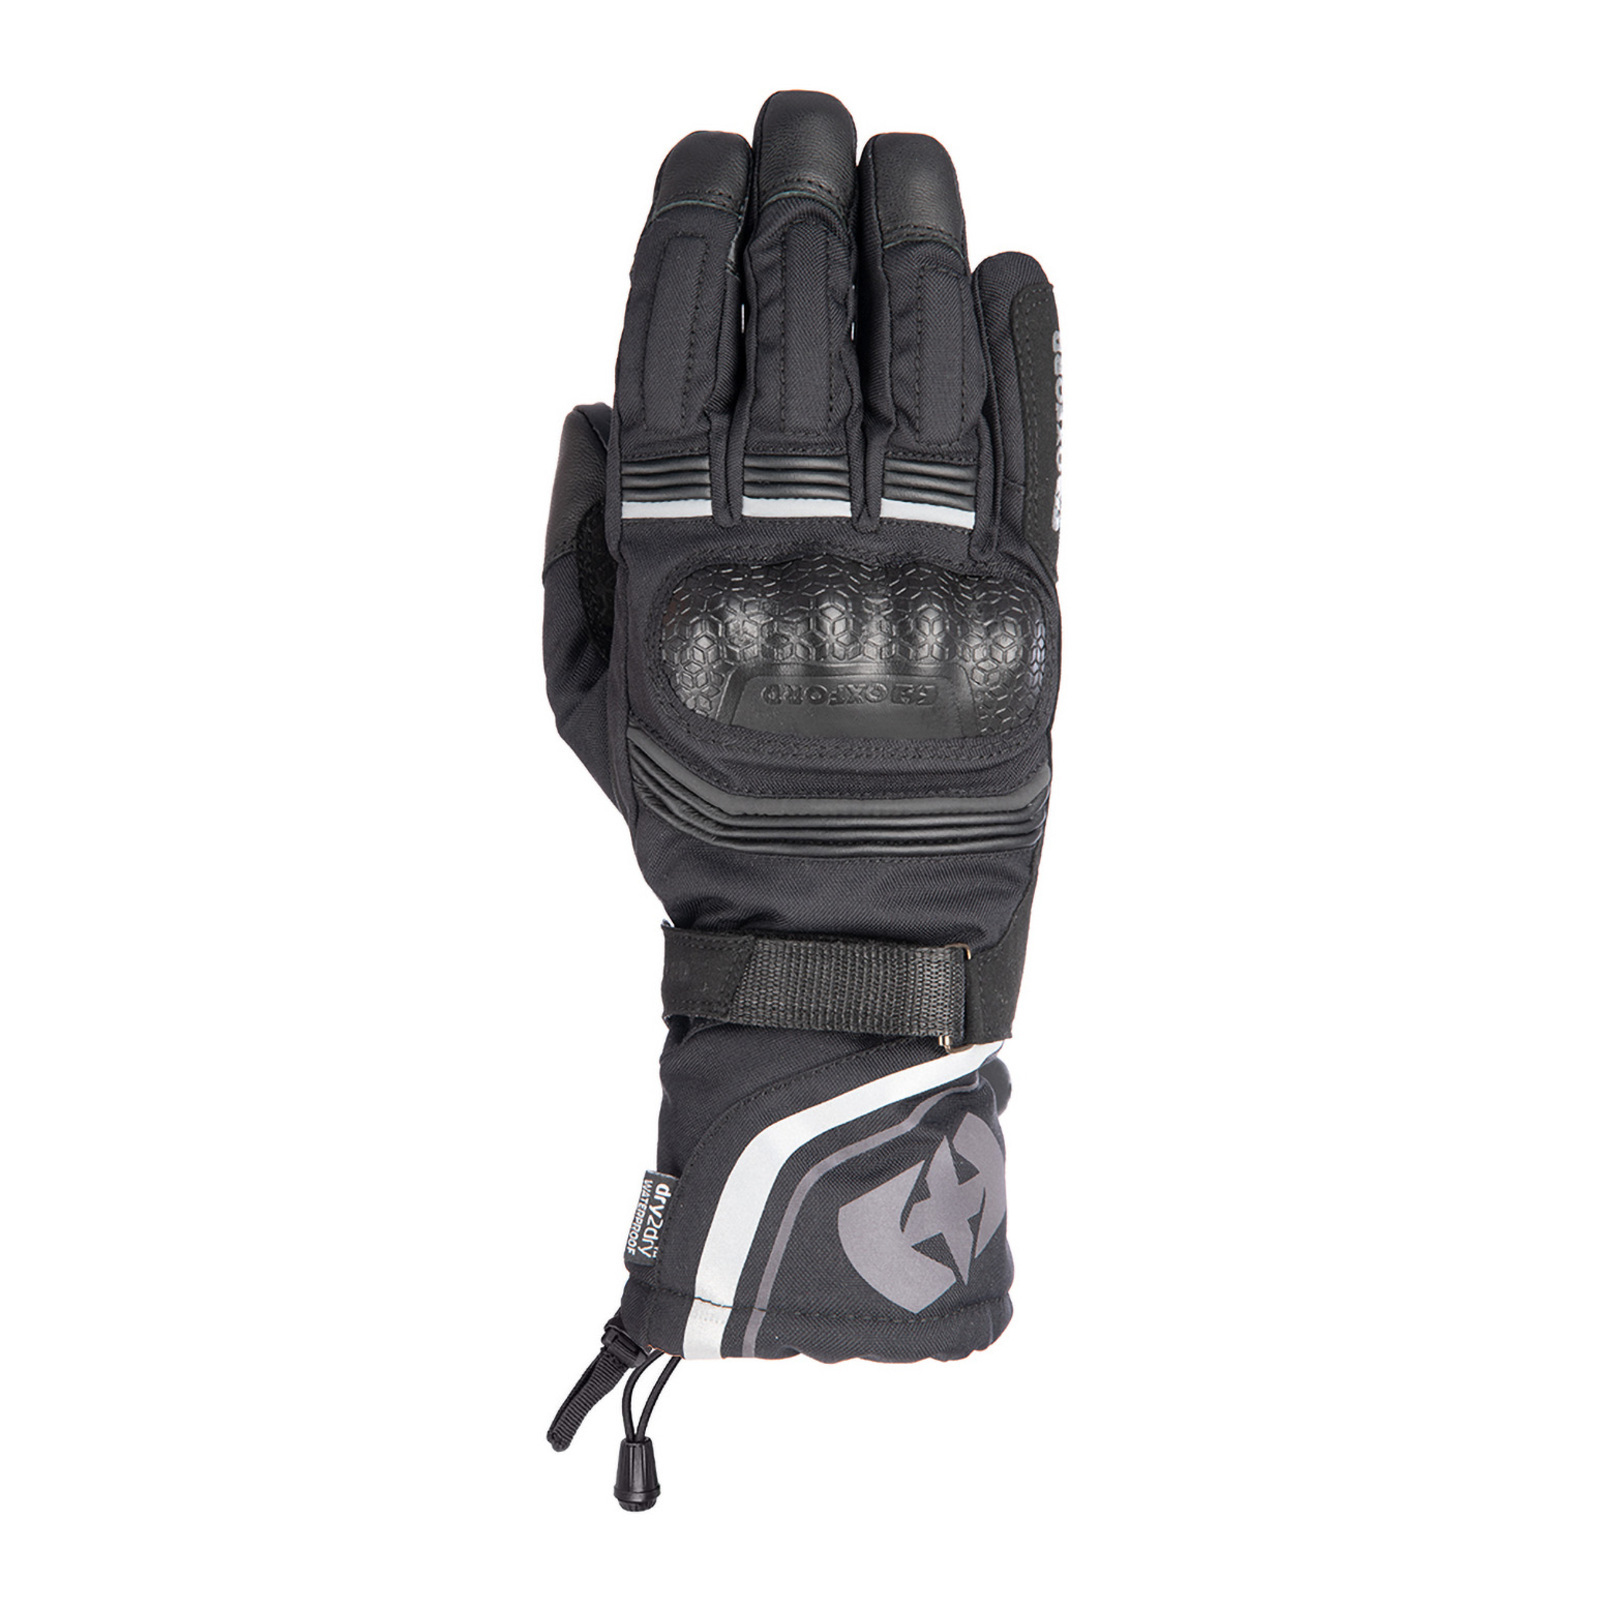 Oxford Montreal 4.0 Dry2Dry Glove - Stealth Black (2XL)